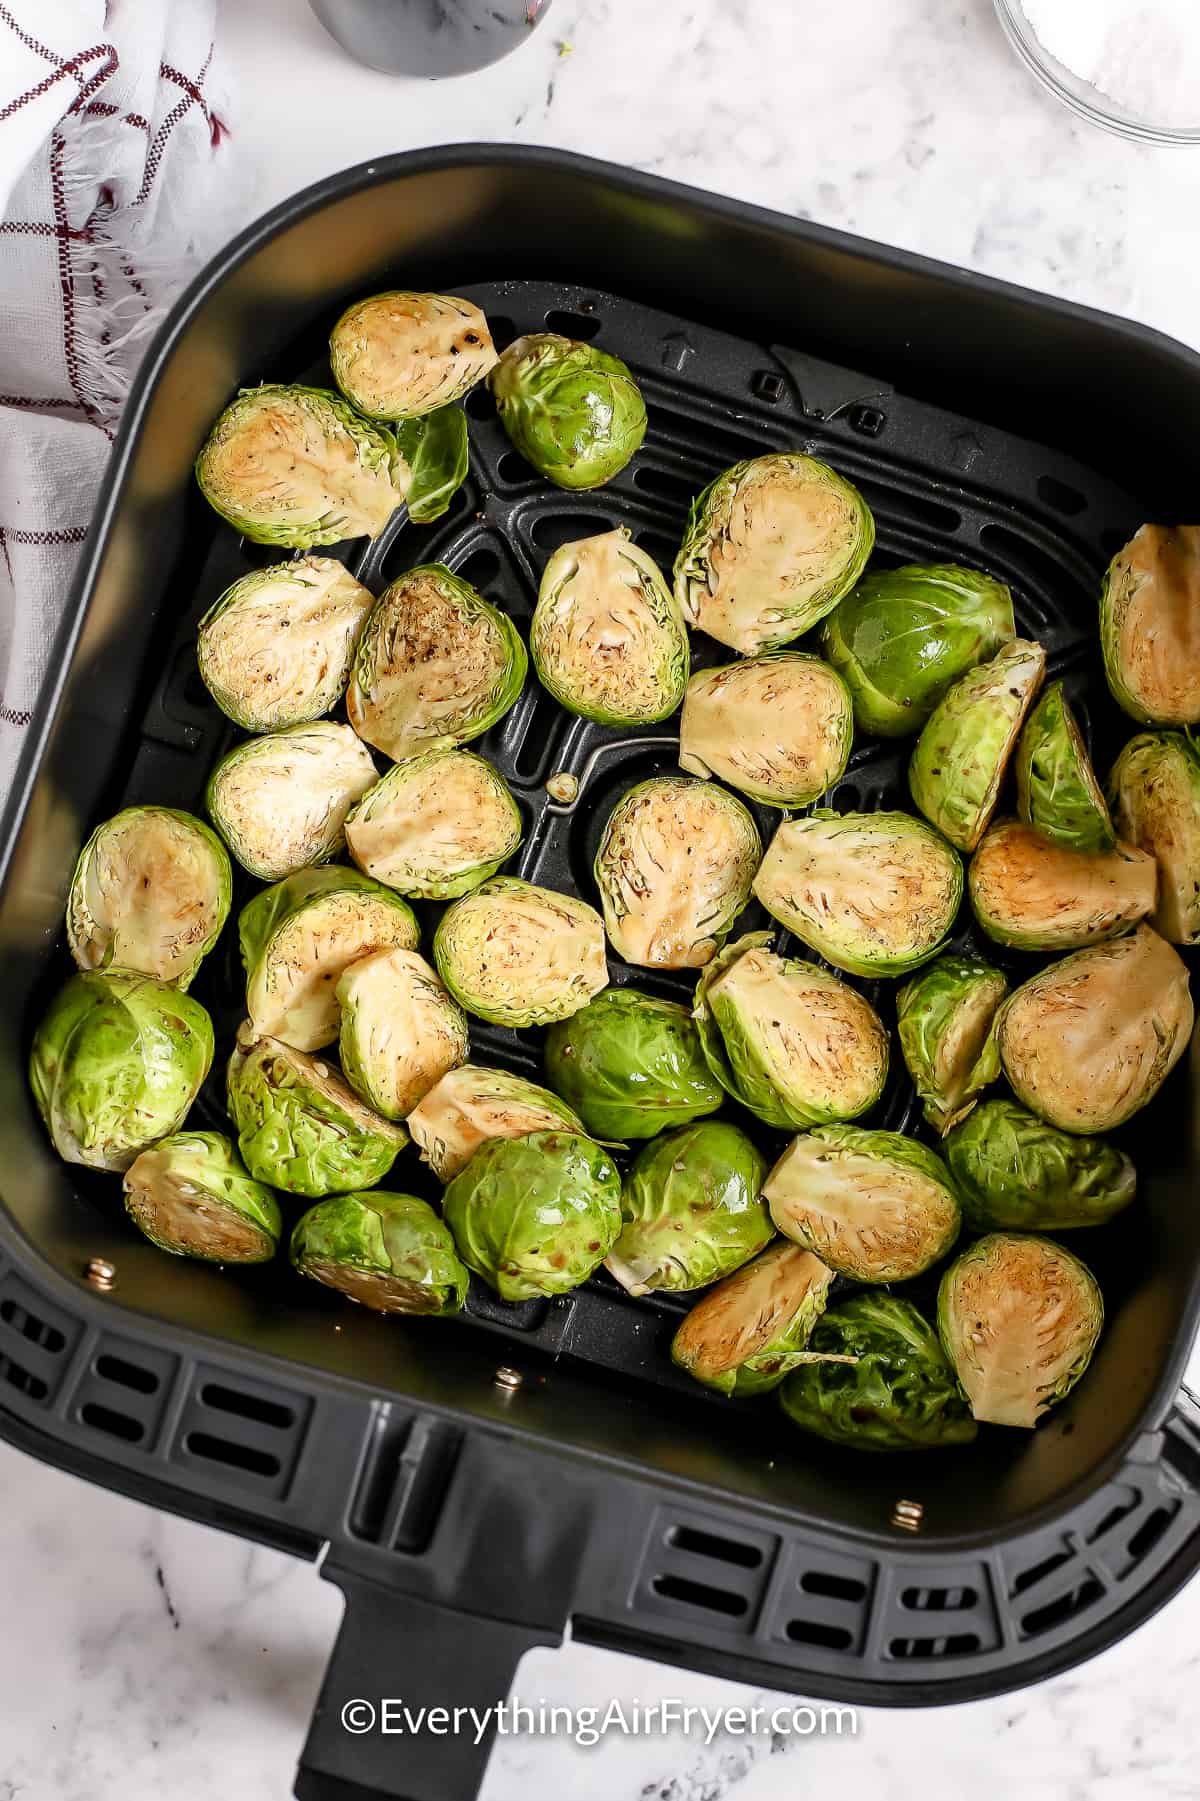 uncooked Brussels sprouts in an air fryer basket